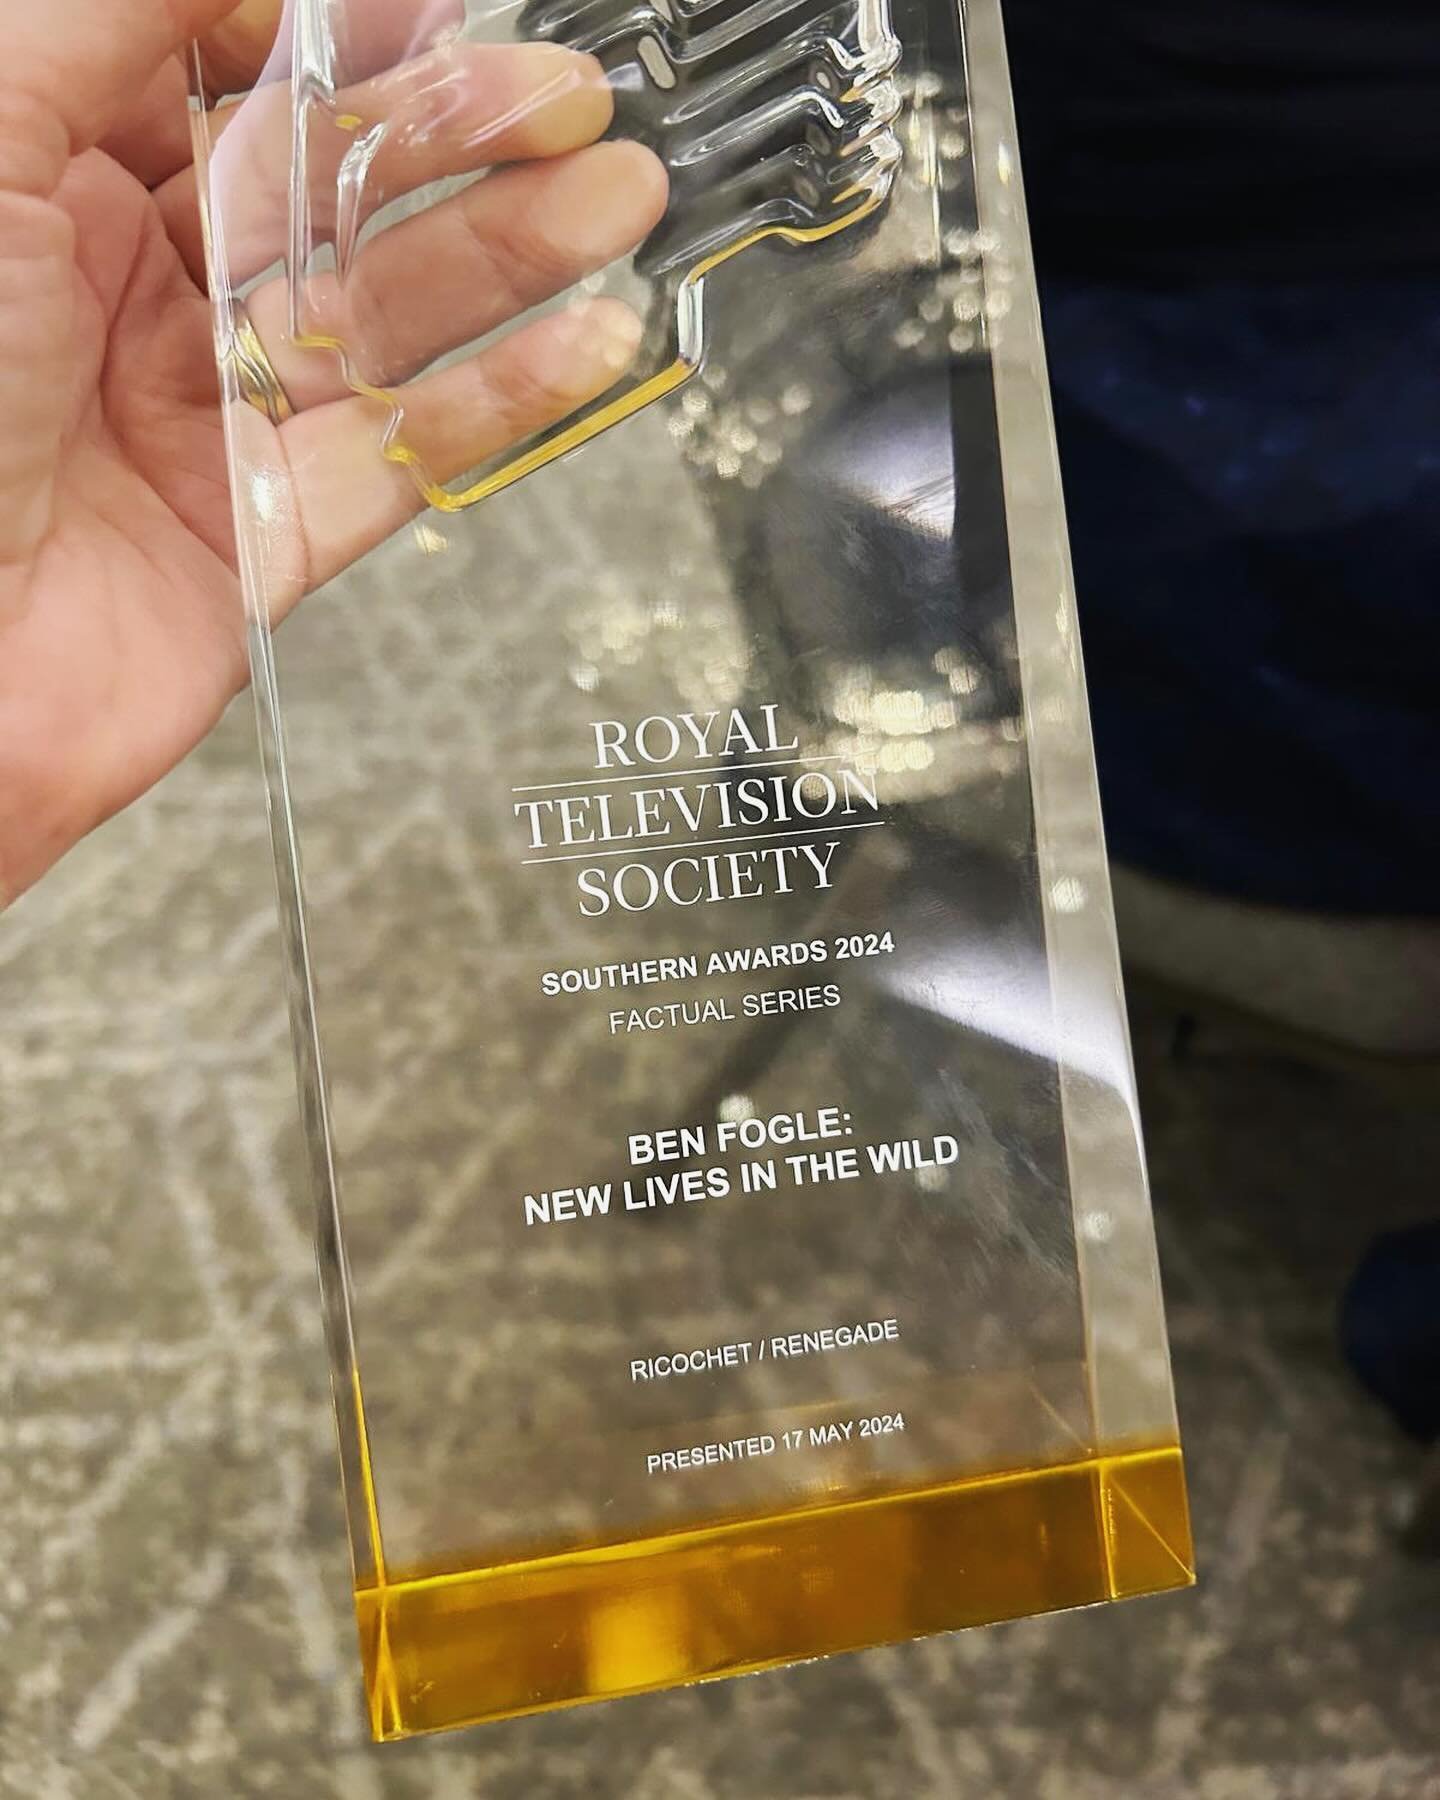 Congratulations to everyone involved in the Worlds most dangerous roads and New Lives in the wild episodes that bagged us these two awards last week. Absolutely chuffed to bits to have been the DOP on the entry episodes and so proud to be part of the